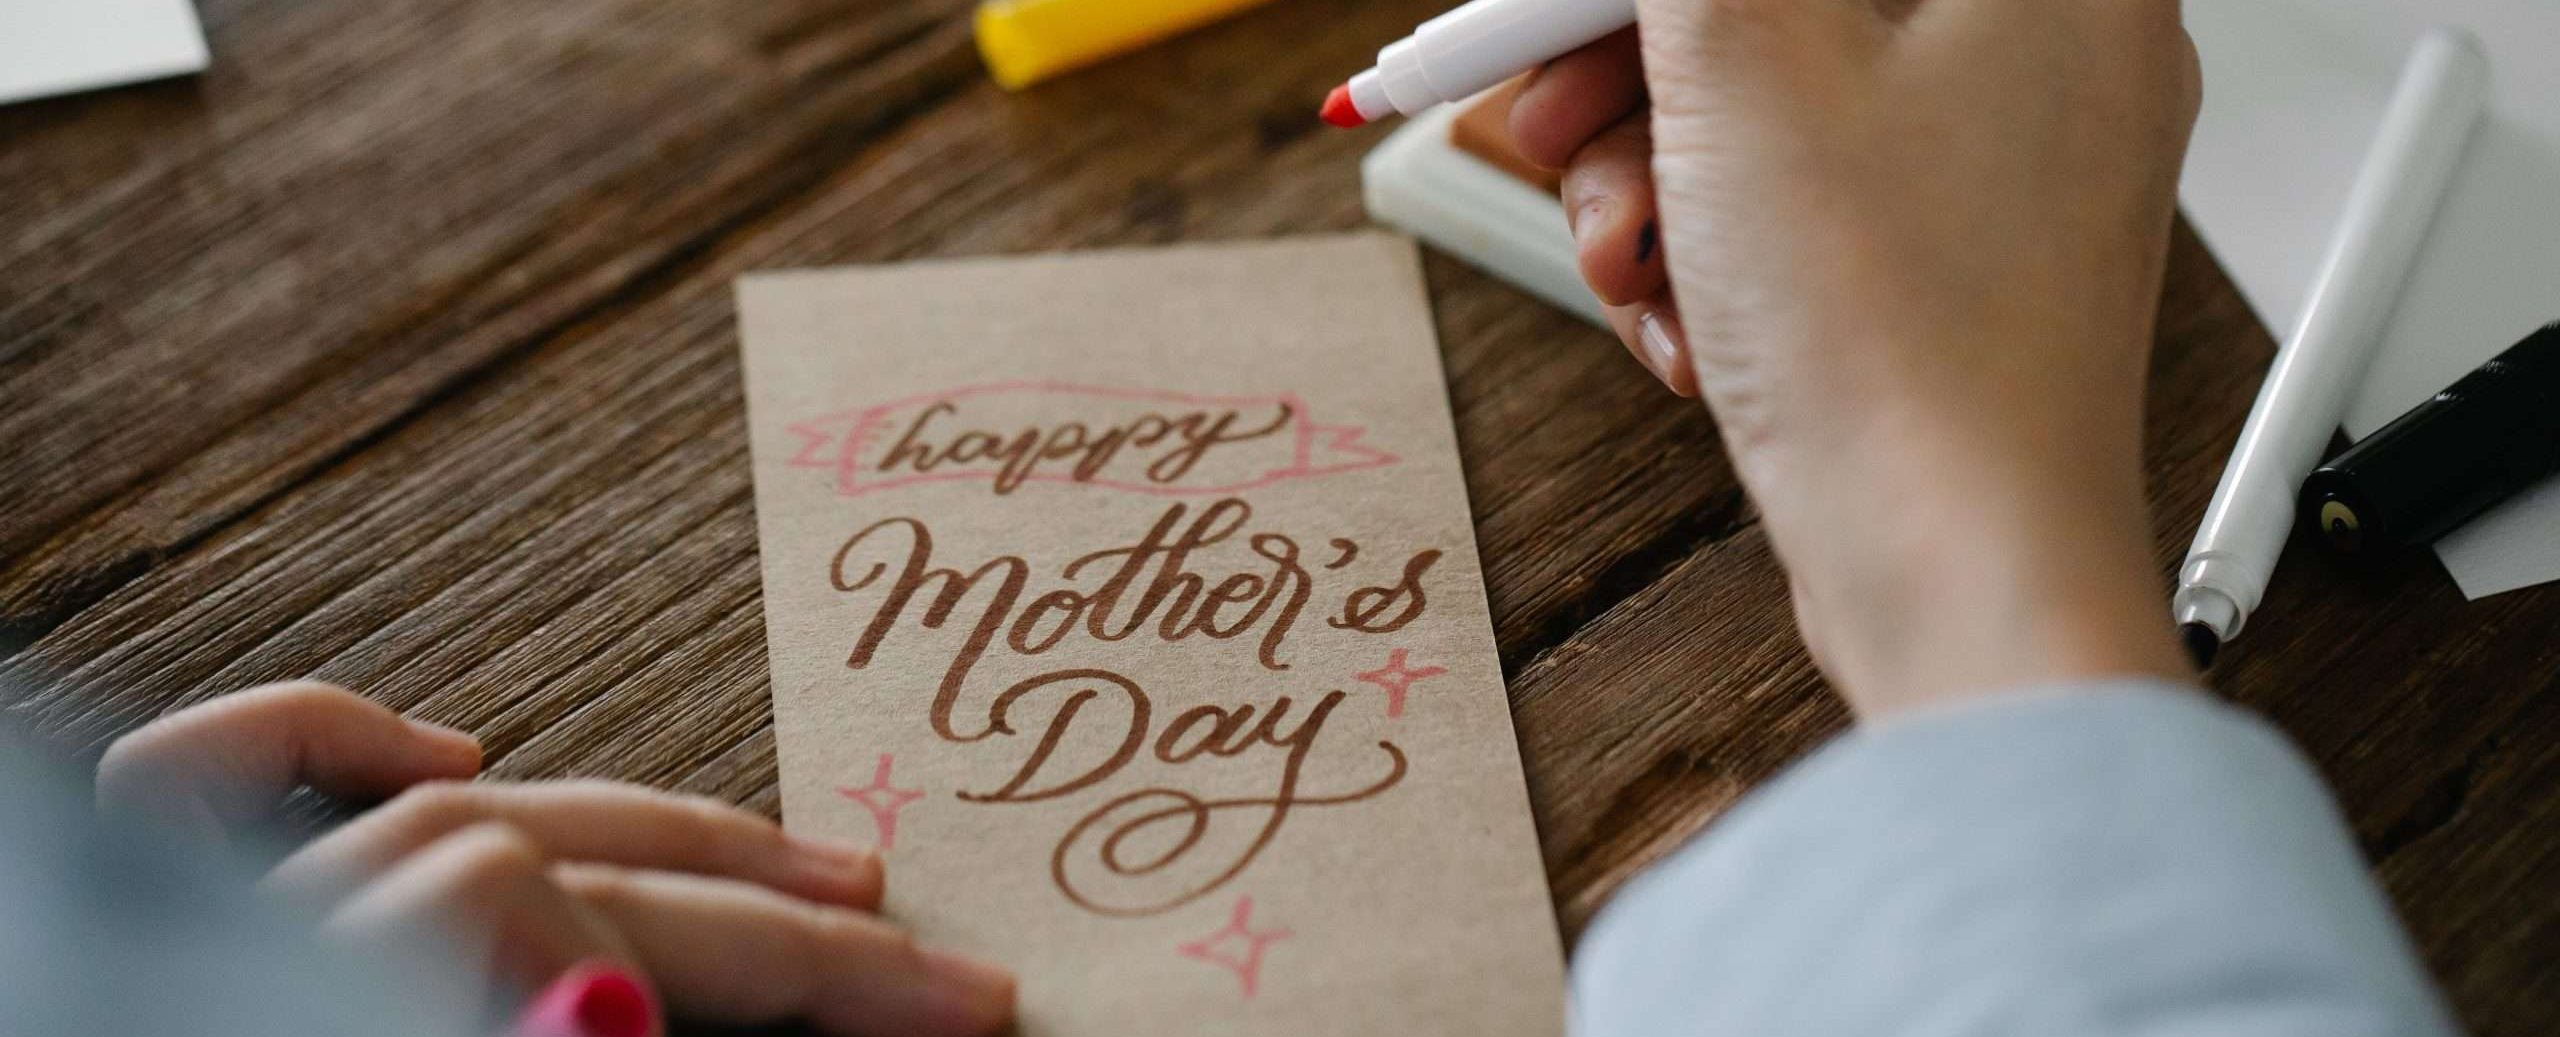 Meaningful gifts for mom on Mother's Day